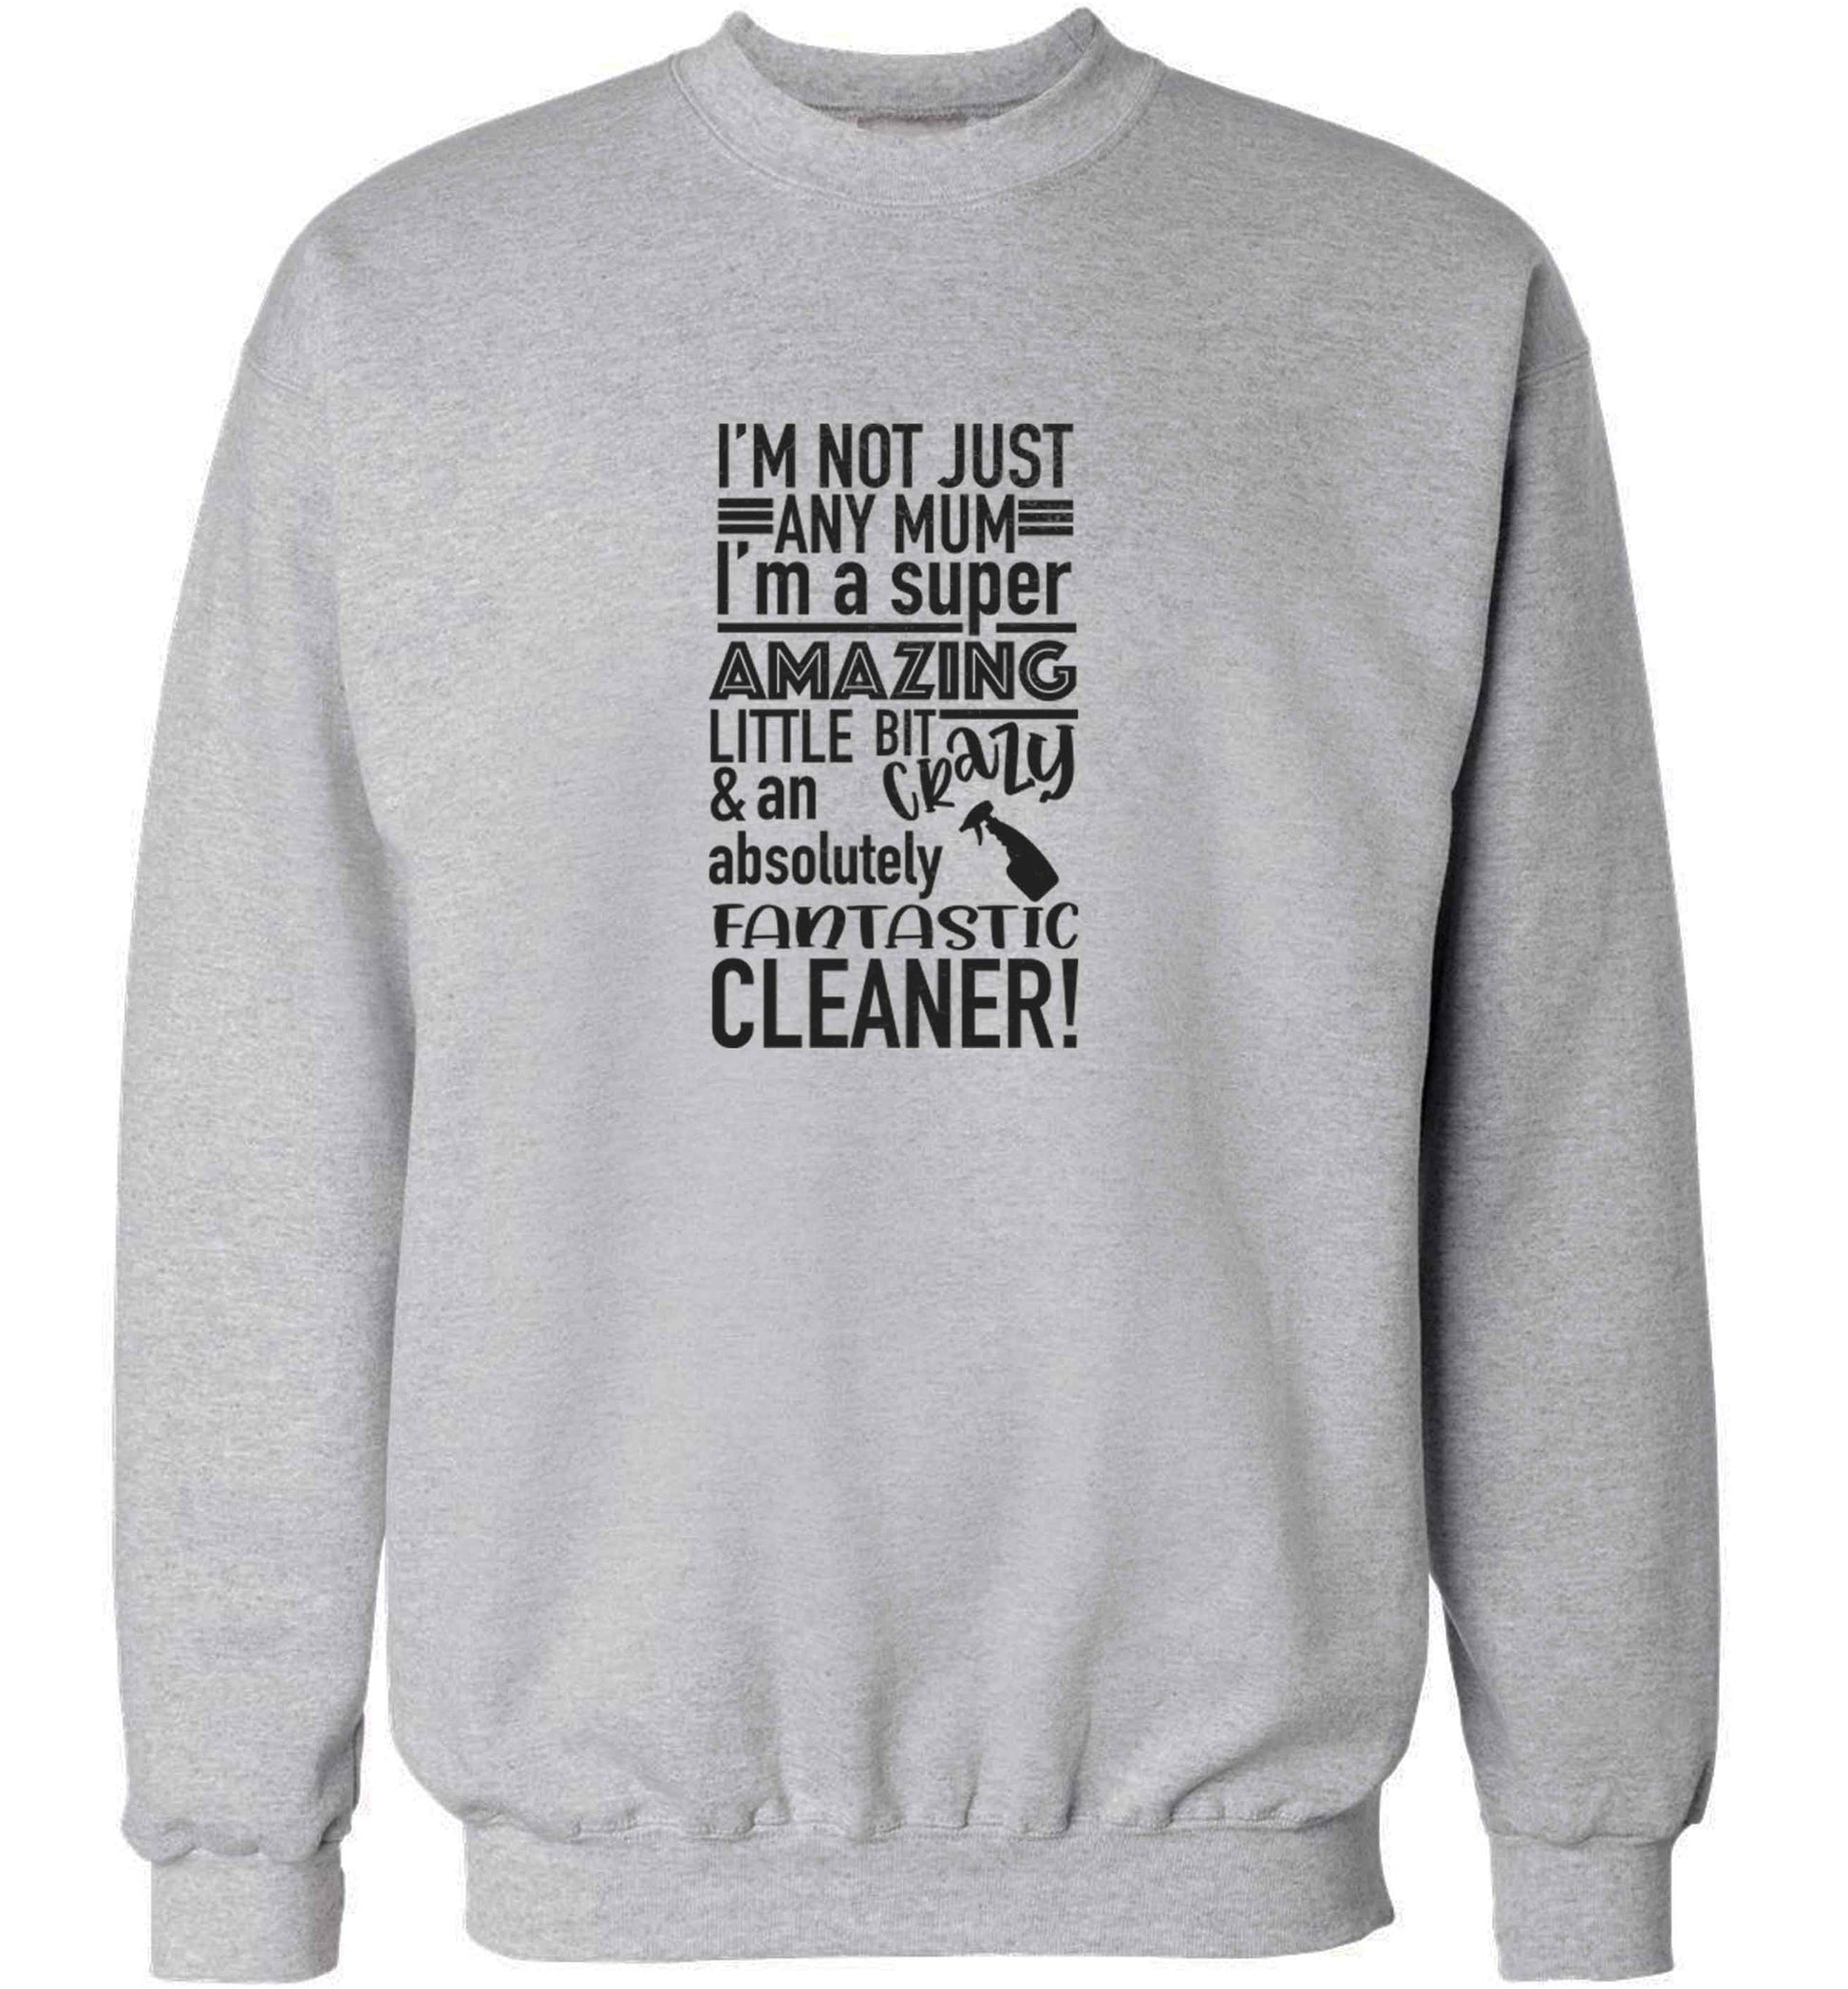 I'm not just any mum I'm a super amazing little bit crazy and an absolutely fantastic cleaner! adult's unisex grey sweater 2XL